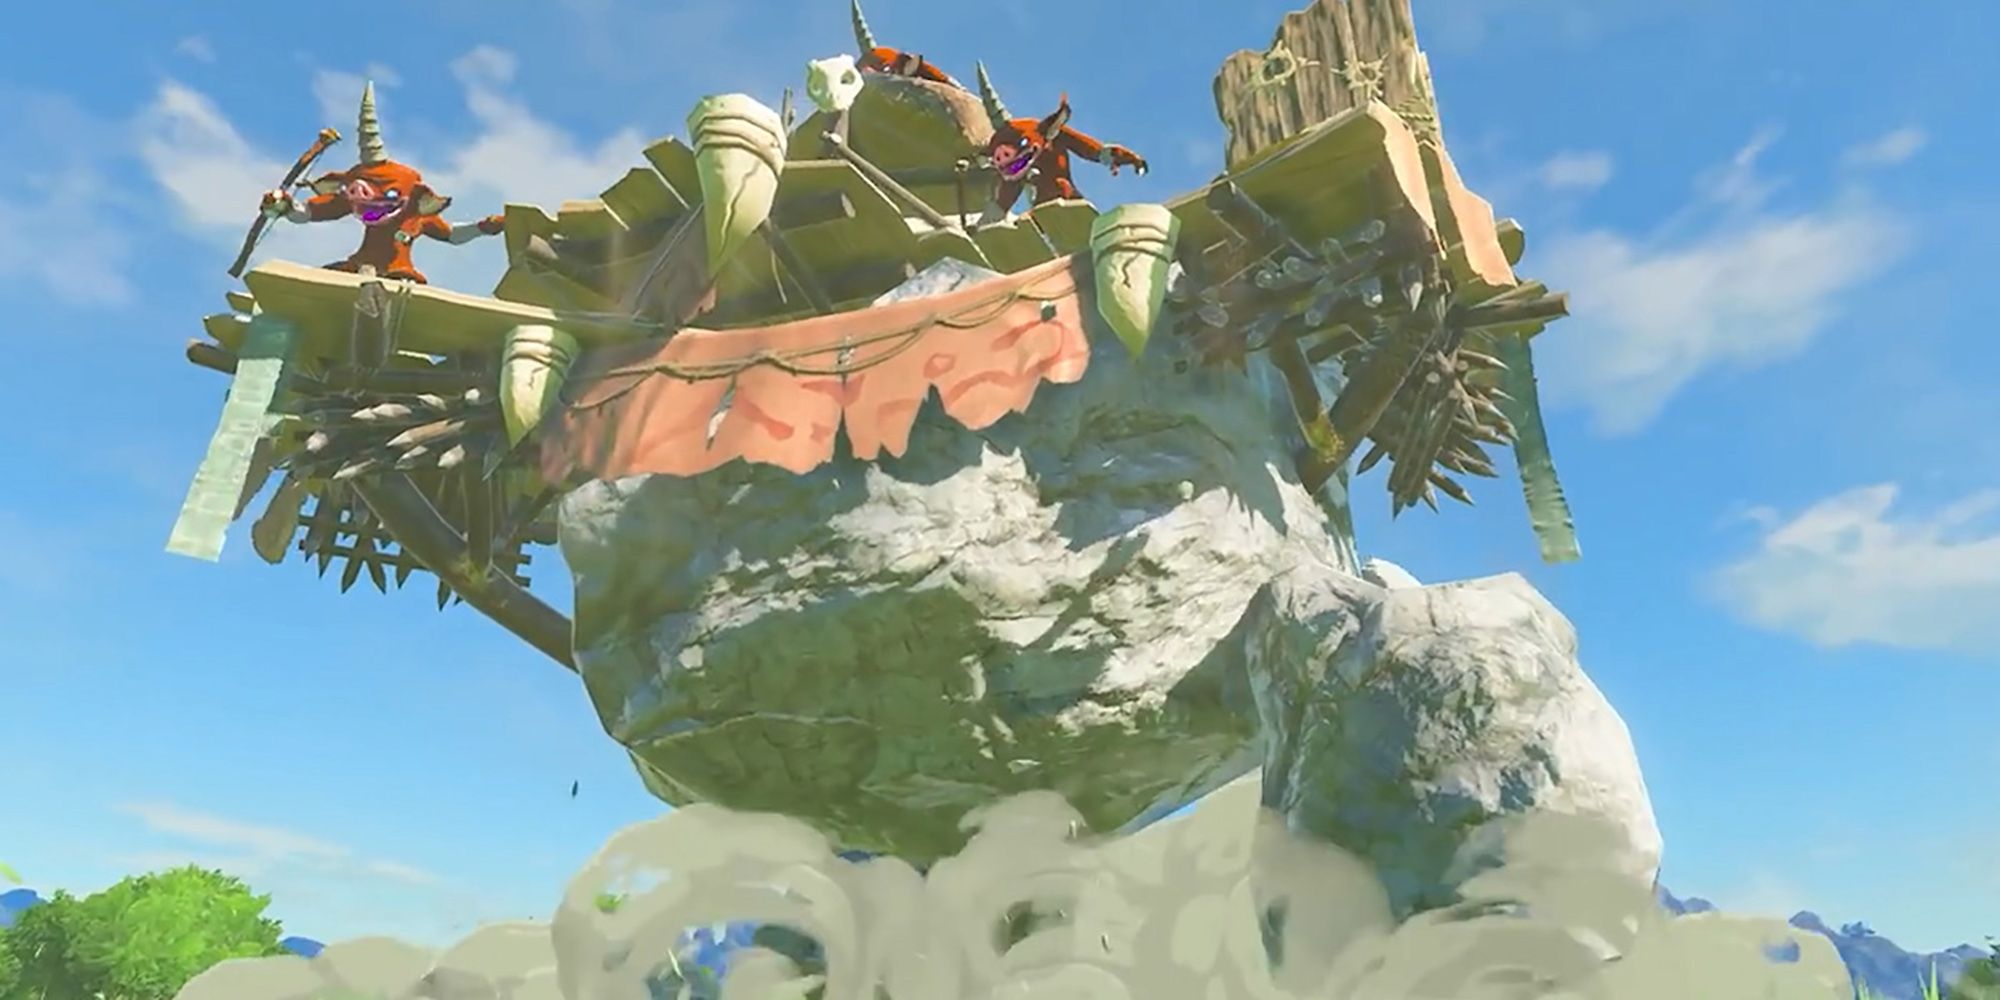 Legend Of Zelda Breath Of The Wild 2 Second Trailer - Moblins Working With Stone Talus